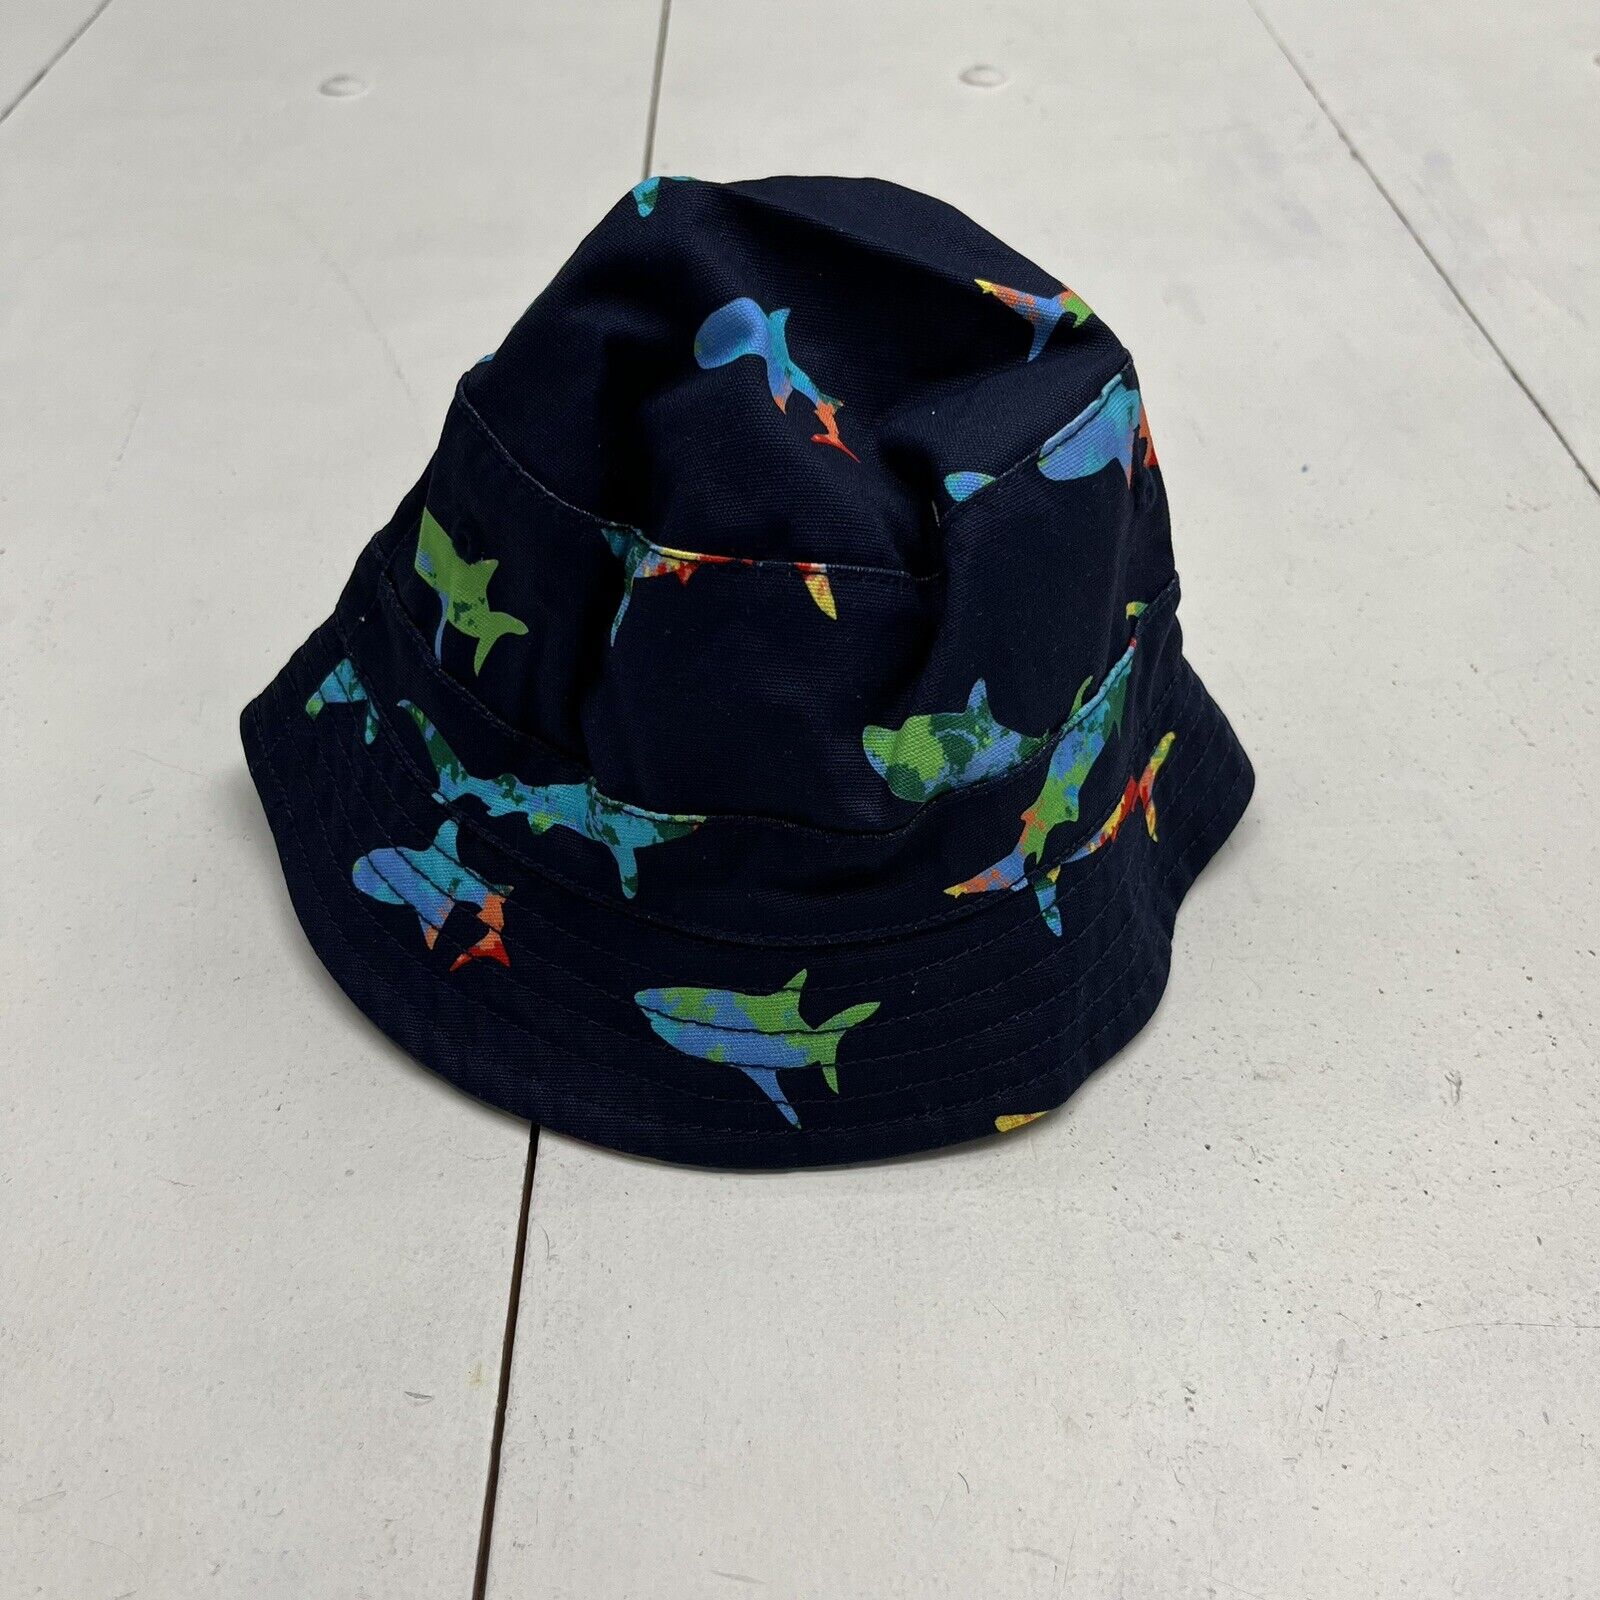 The Children's Place Multicolored Fish Bucket Hat Kids Size Small (24M -  beyond exchange